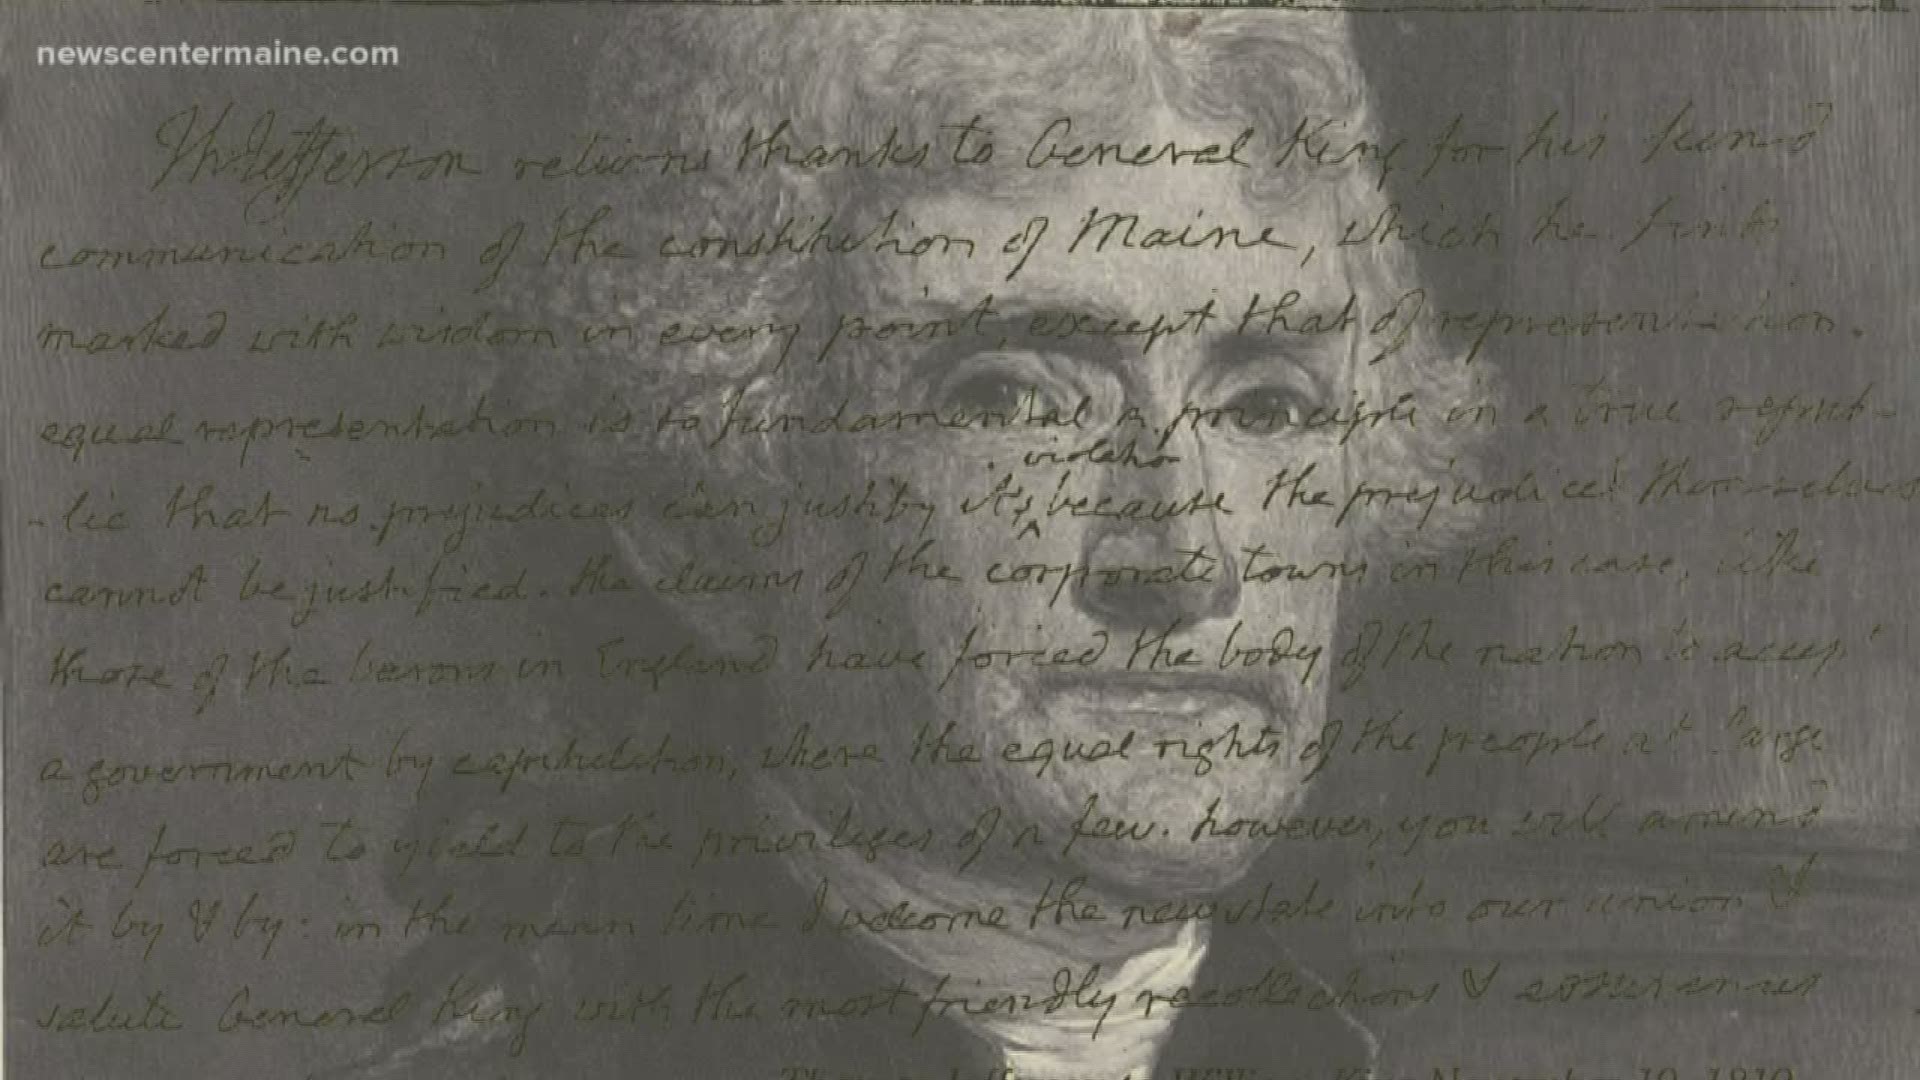 But Jefferson may have had a more direct involvement with Maine’s constitution, and may actually have written part of it, according to Herb Adams.